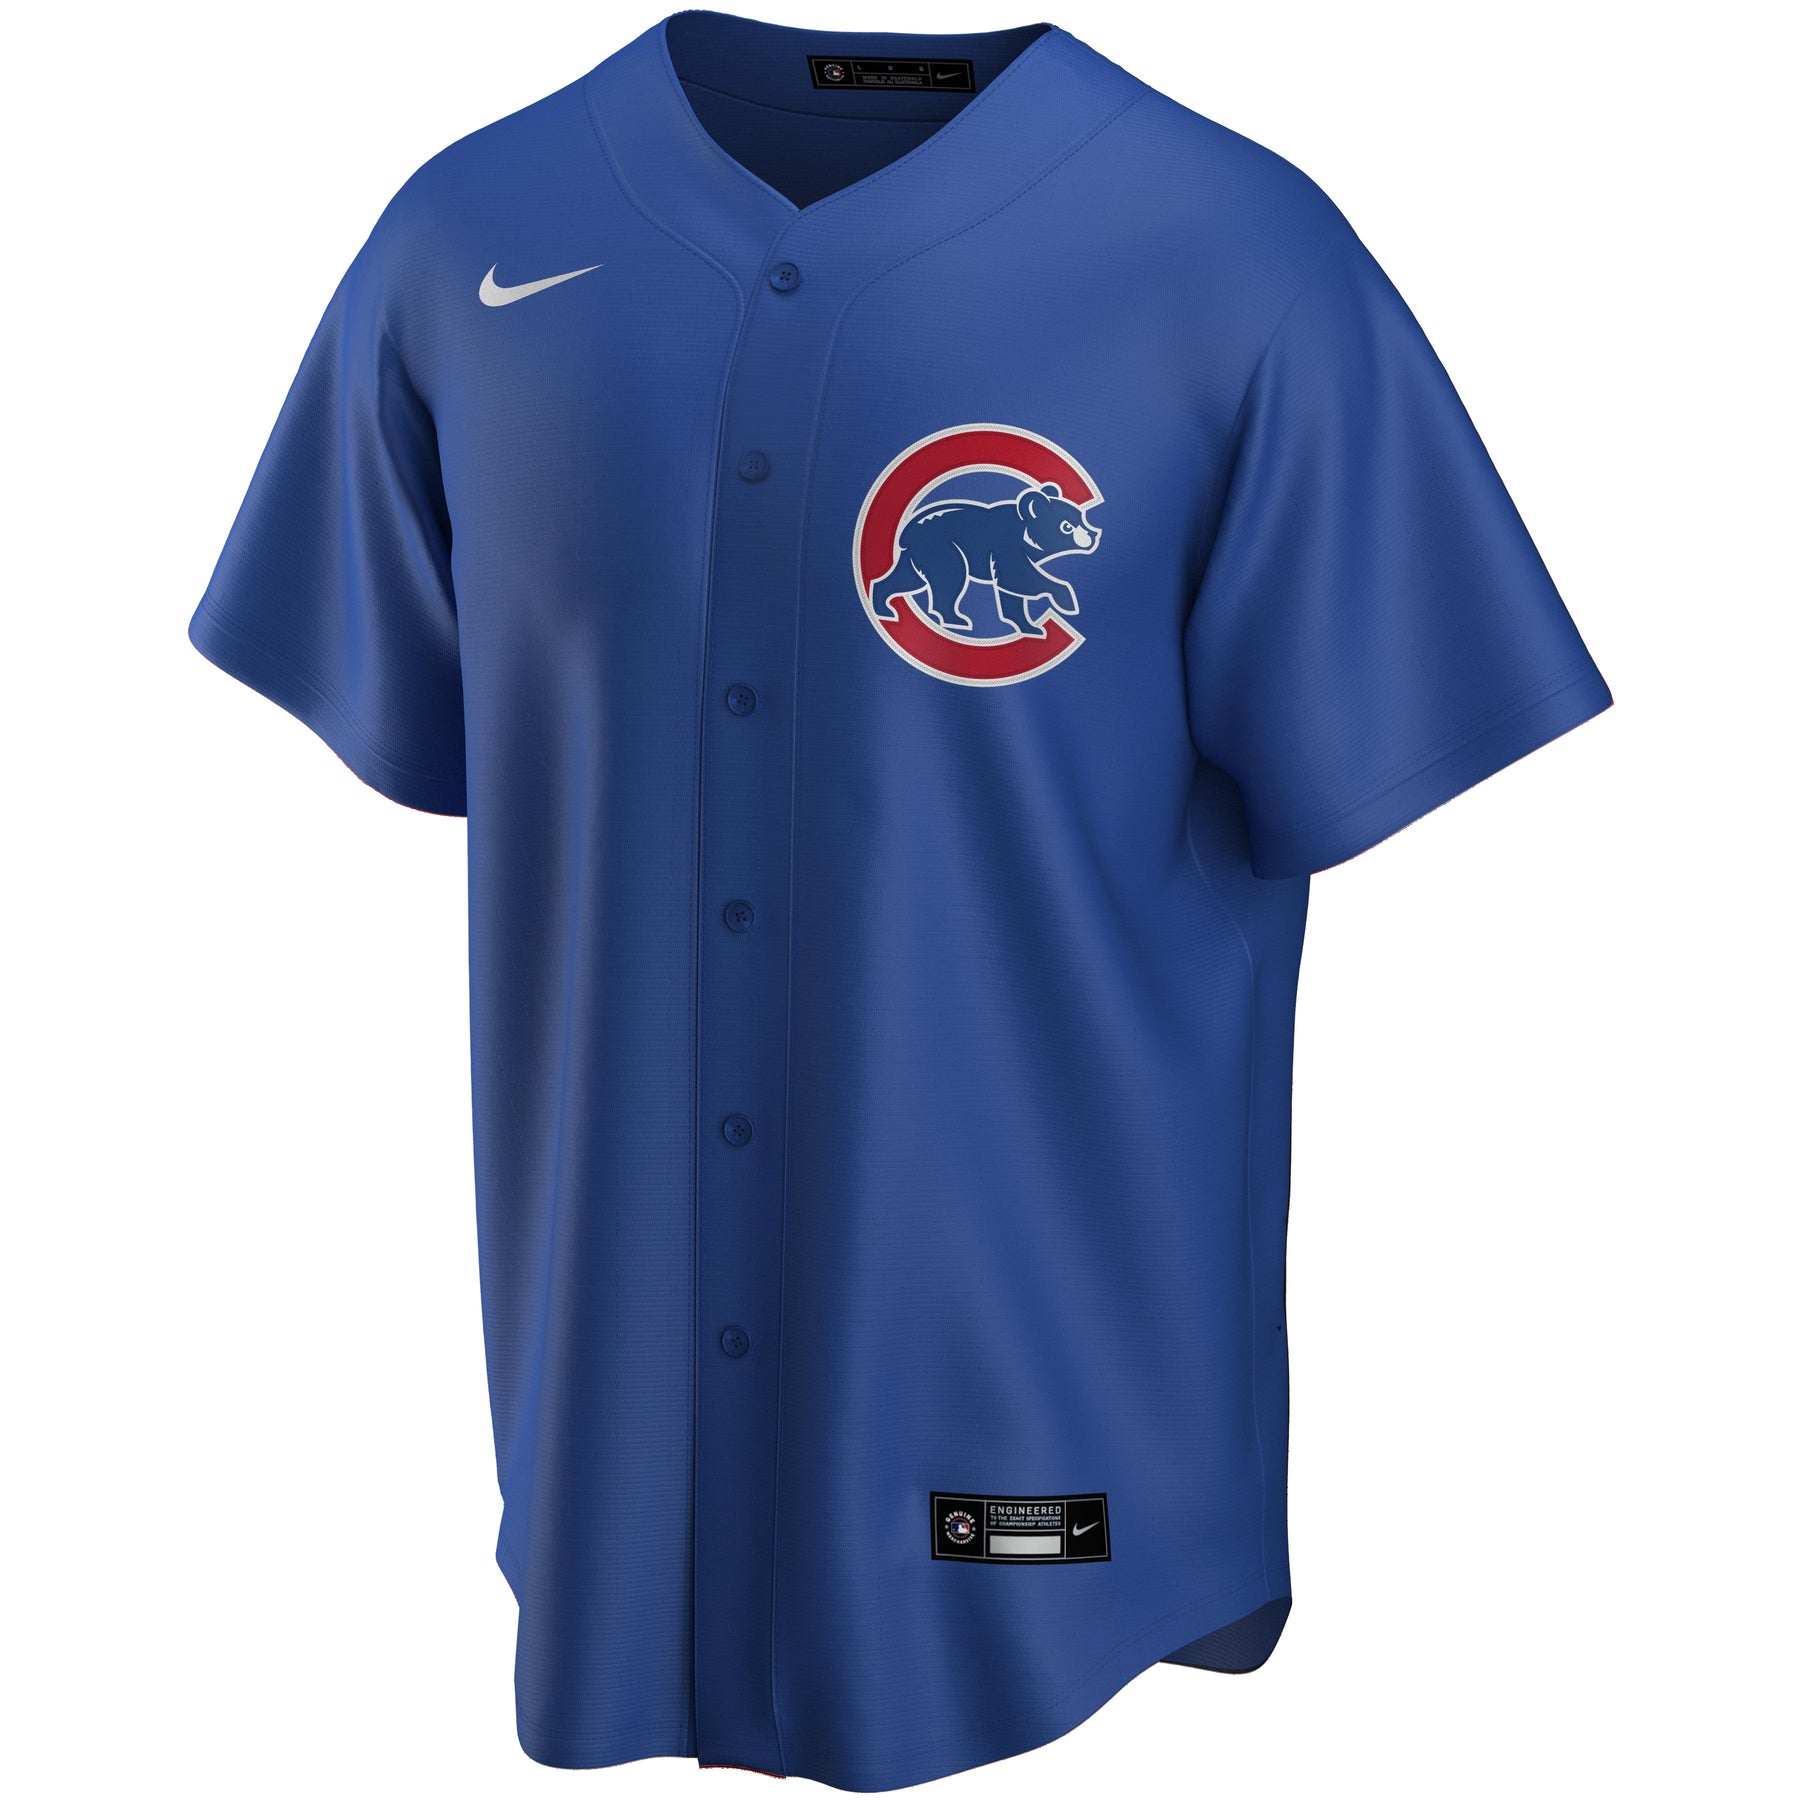 anthony rizzo jersey number